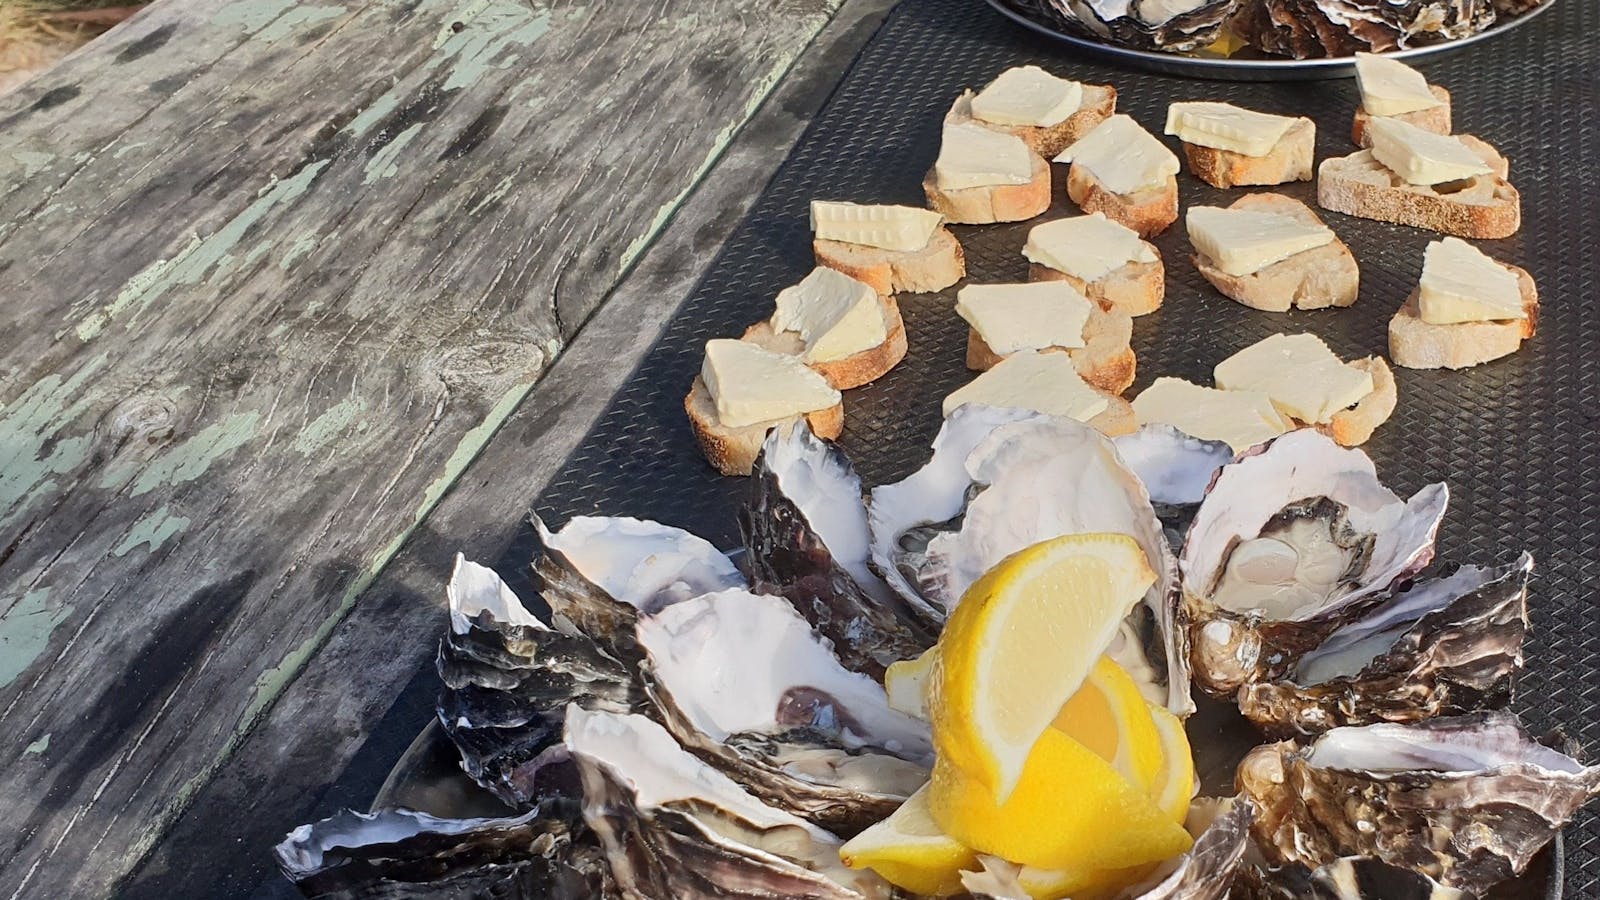 Bruny Island Cheese, Oysters and Wood Fired Oven Bread for morning tea